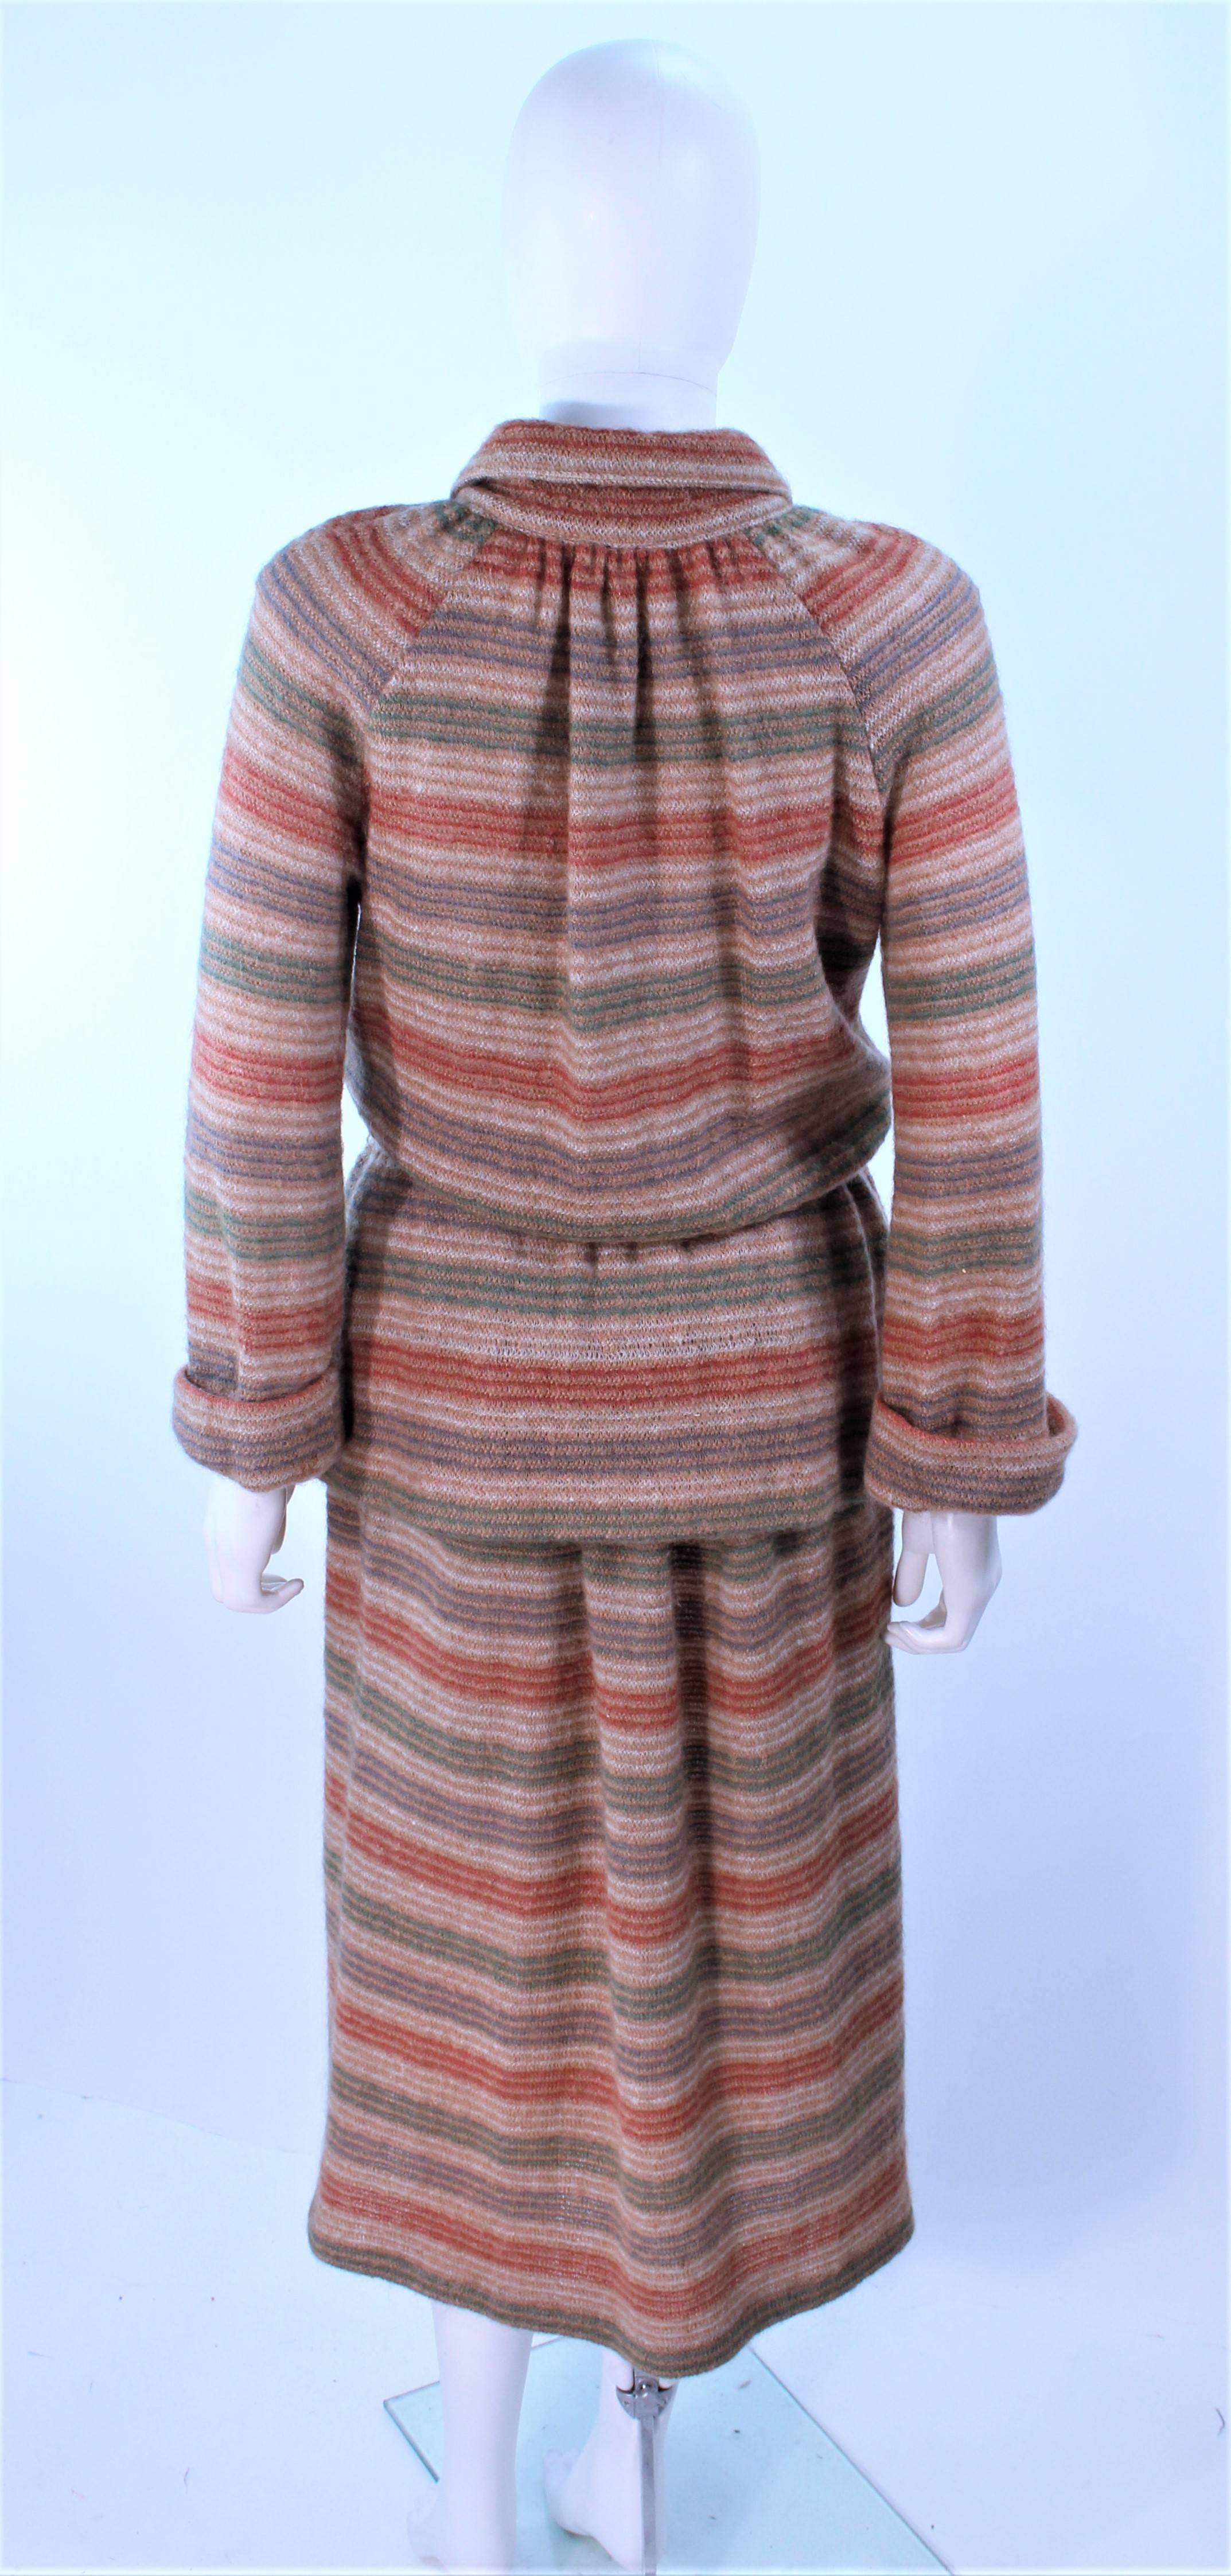 MISSONI Khaki Knit Wool Striped Skirt Set Size 8 10 In Excellent Condition For Sale In Los Angeles, CA